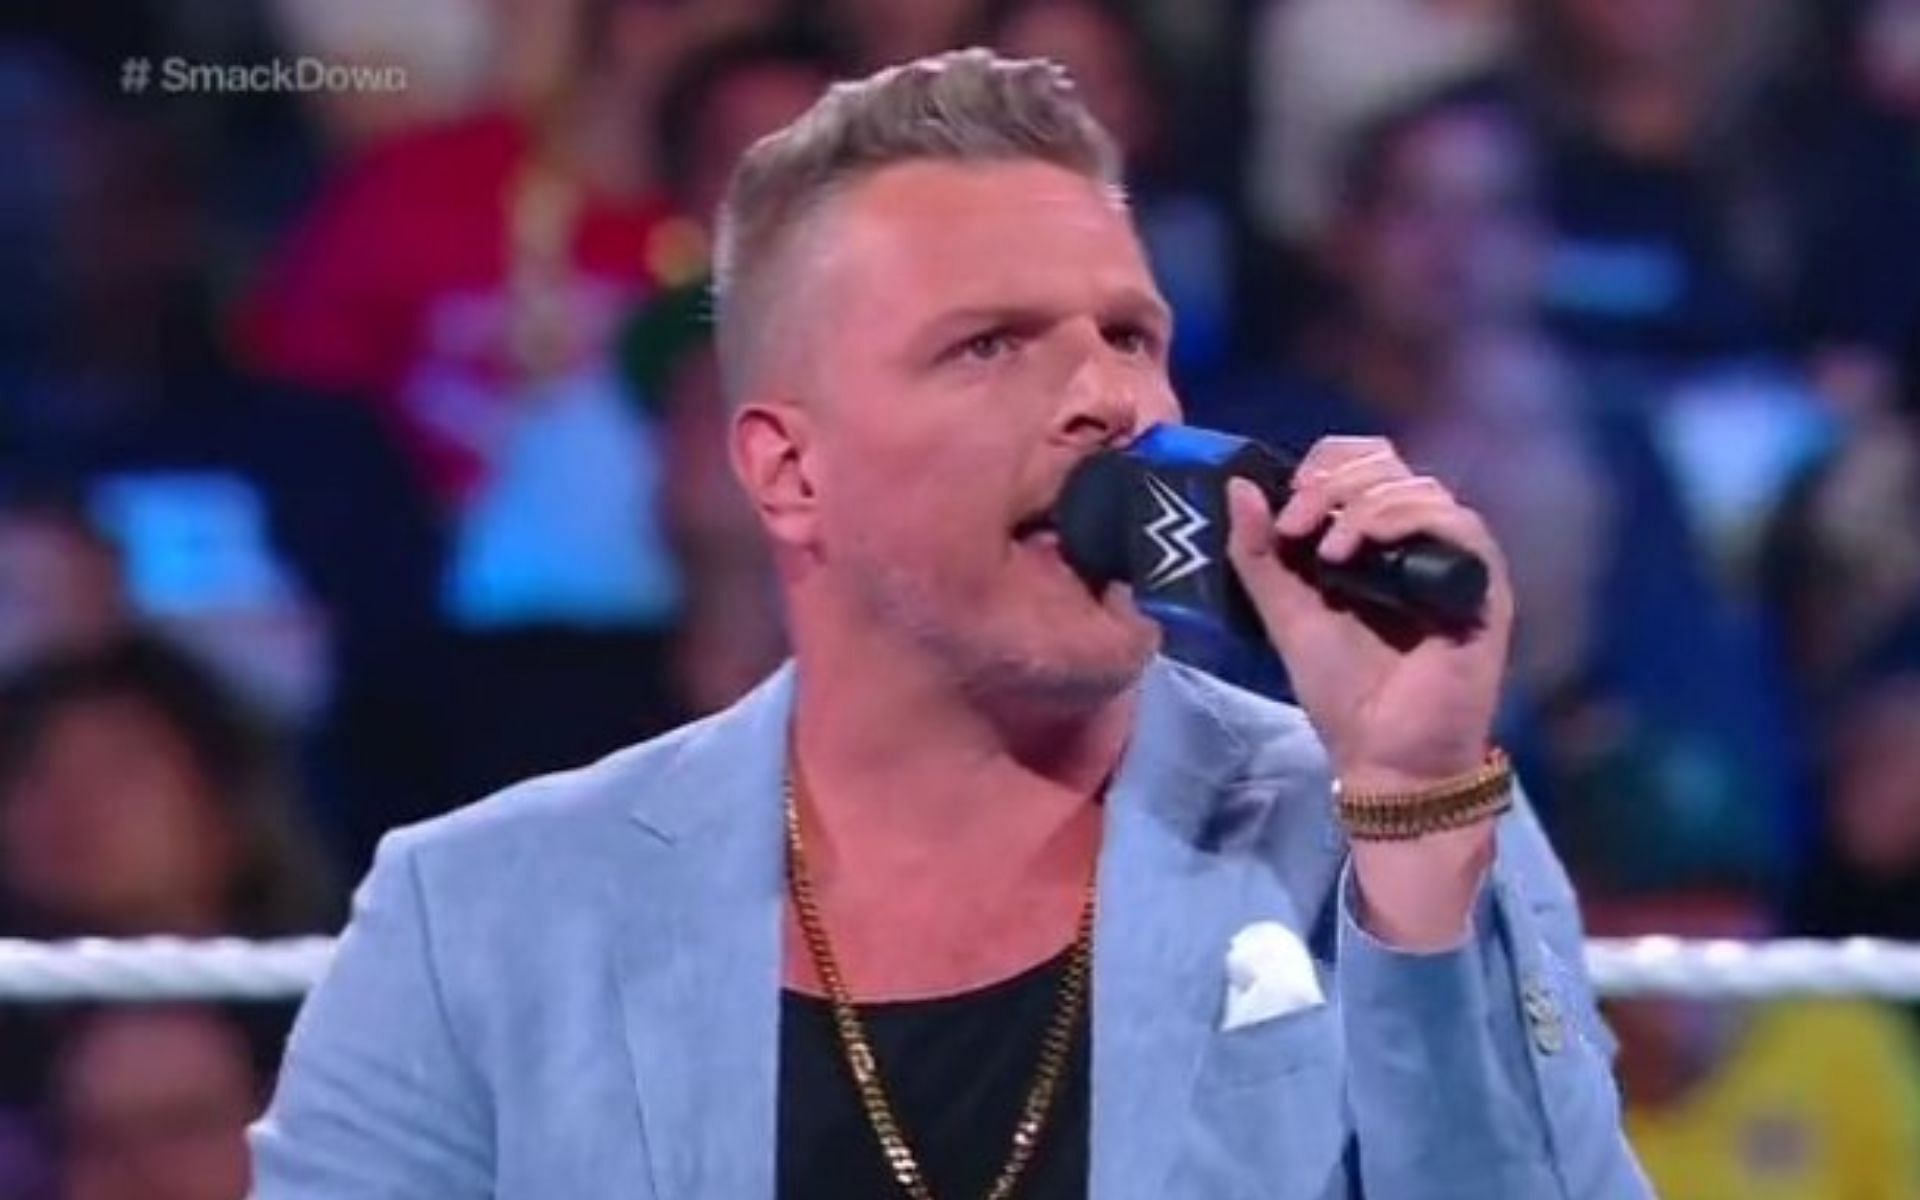 Pat McAfee is a color commentator on SmackDown